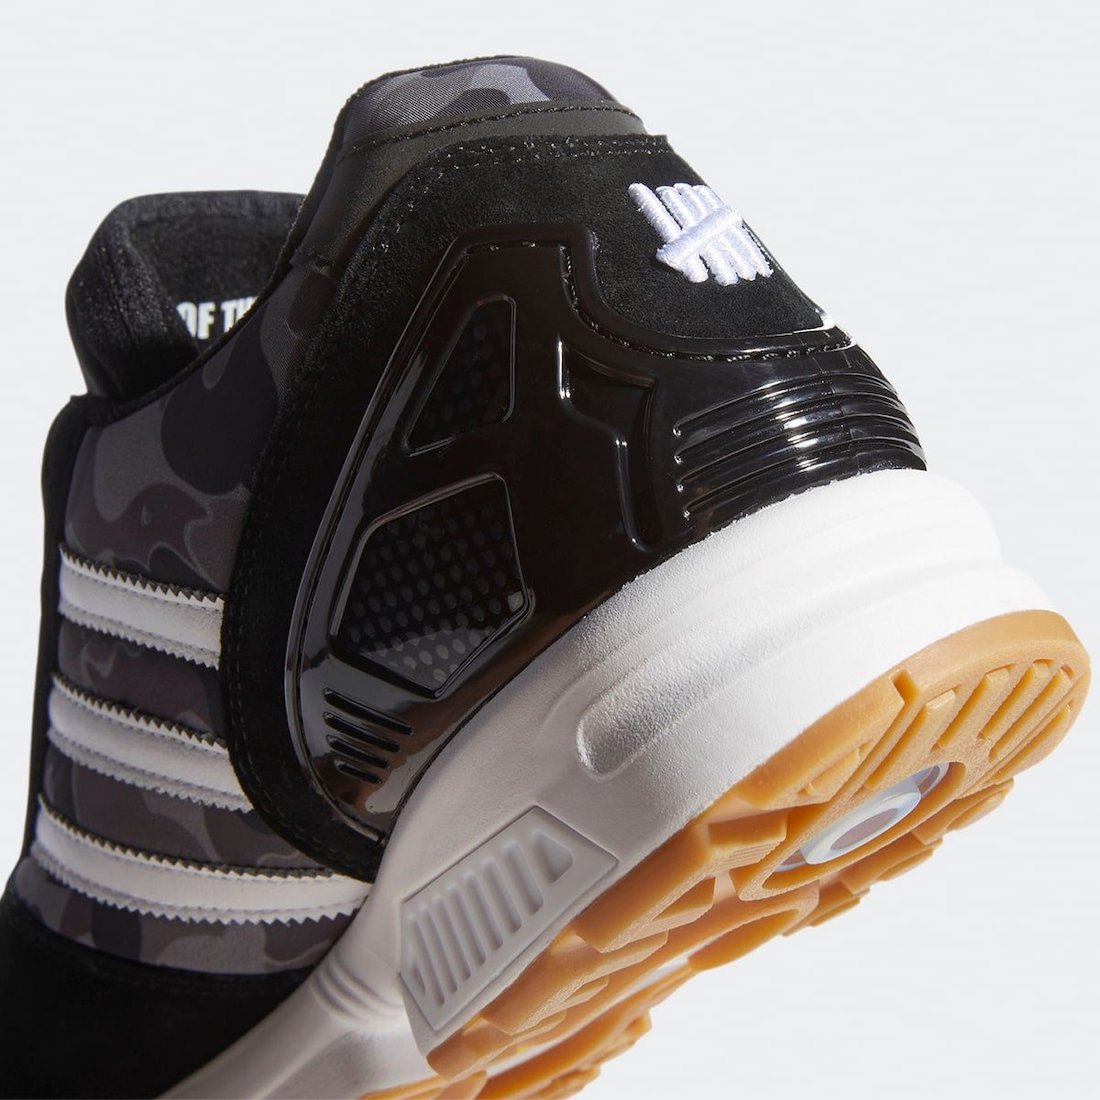 BAPE Undefeated adidas ZX 8000 FY8852 Release Date Info